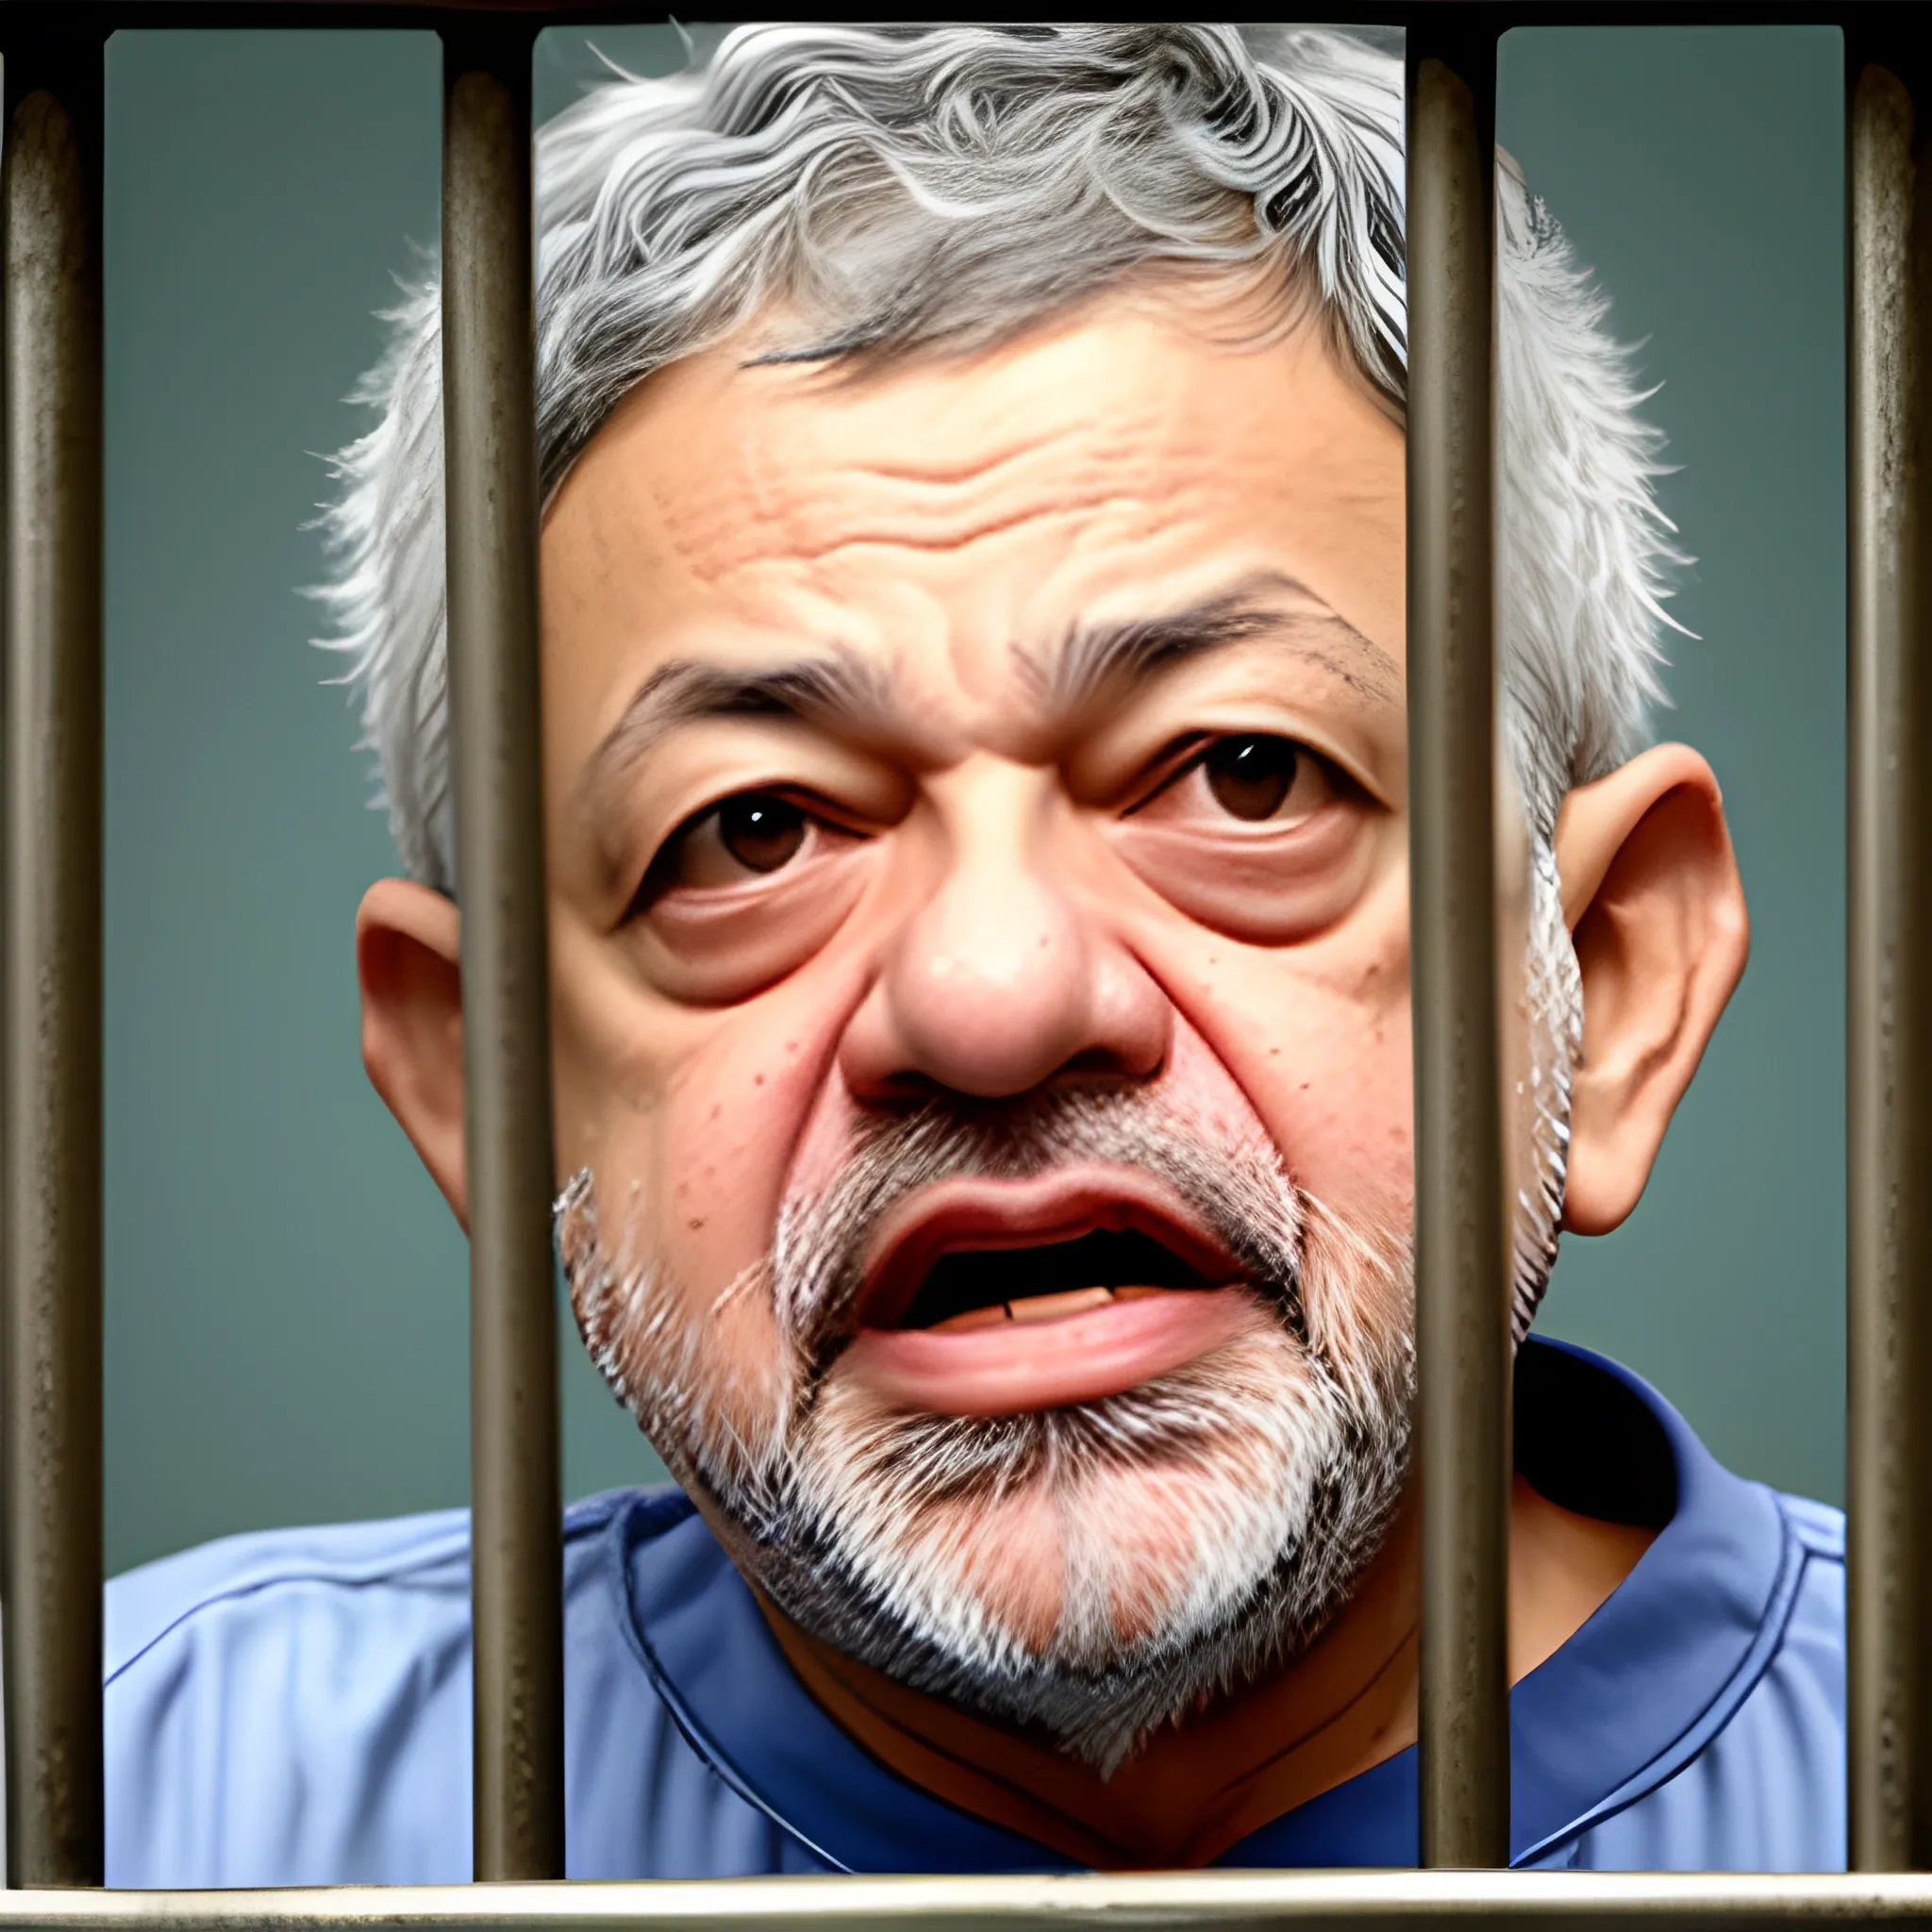 Lula behind bars, with a brave face holding the bars and shouting for democracy